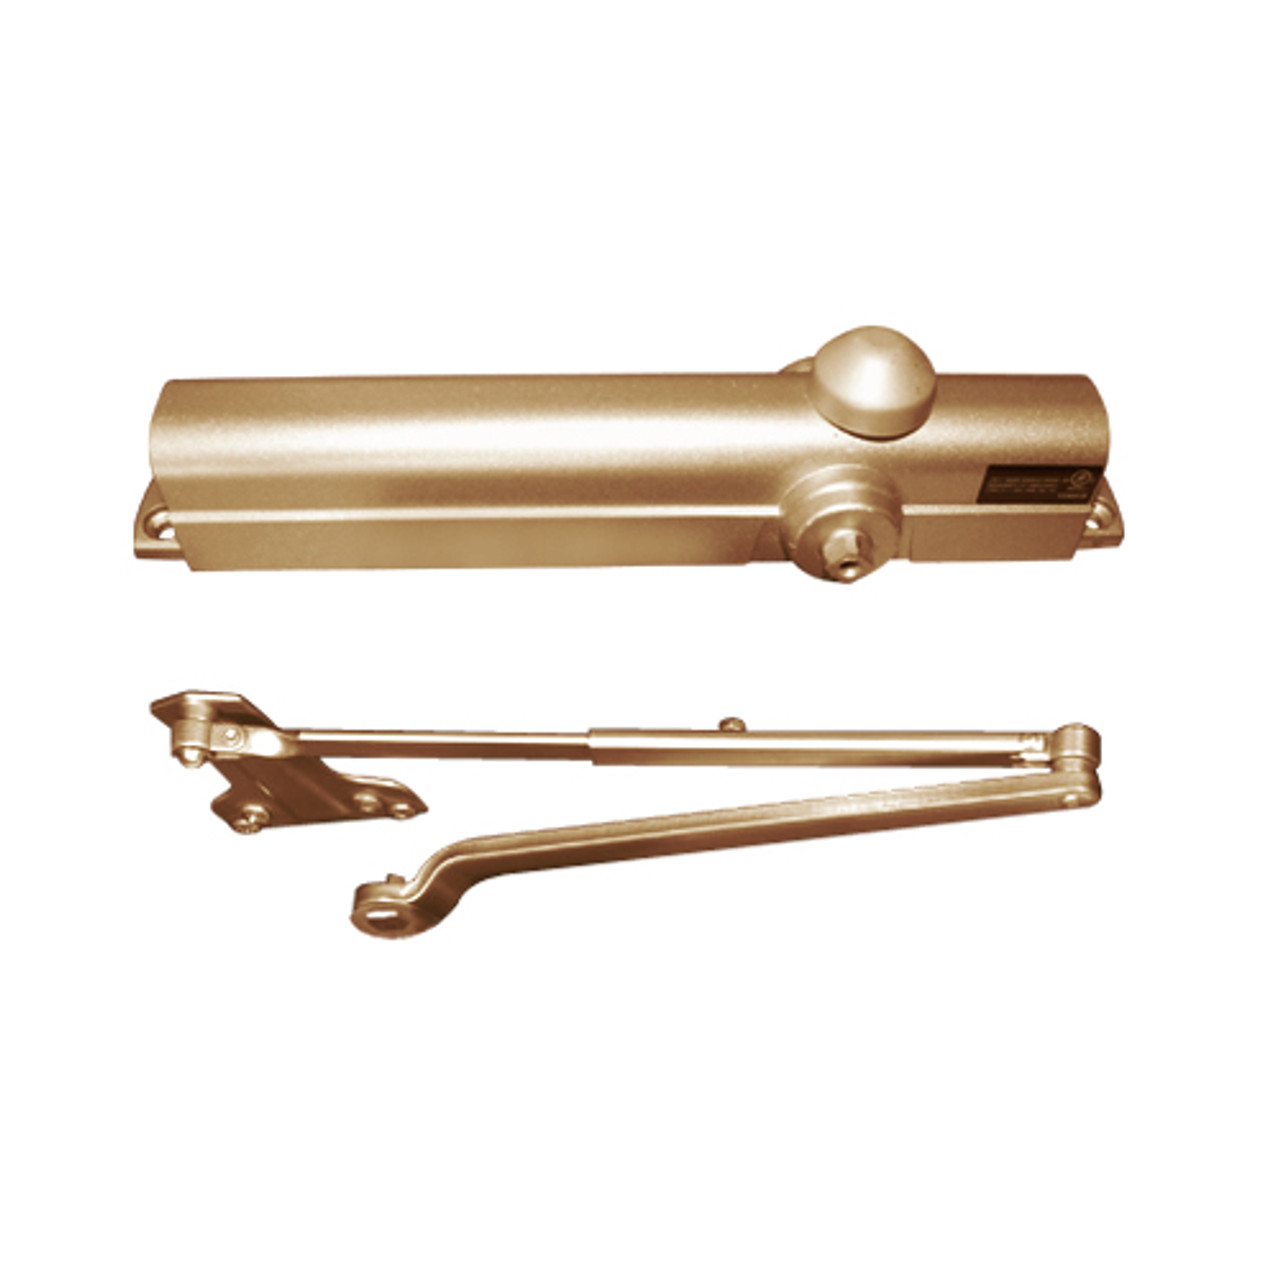 P8181DA-691 Norton 8000 Series Non-Hold Open Door Closers with Parallel Low Profile Arm in Dull Bronze Finish